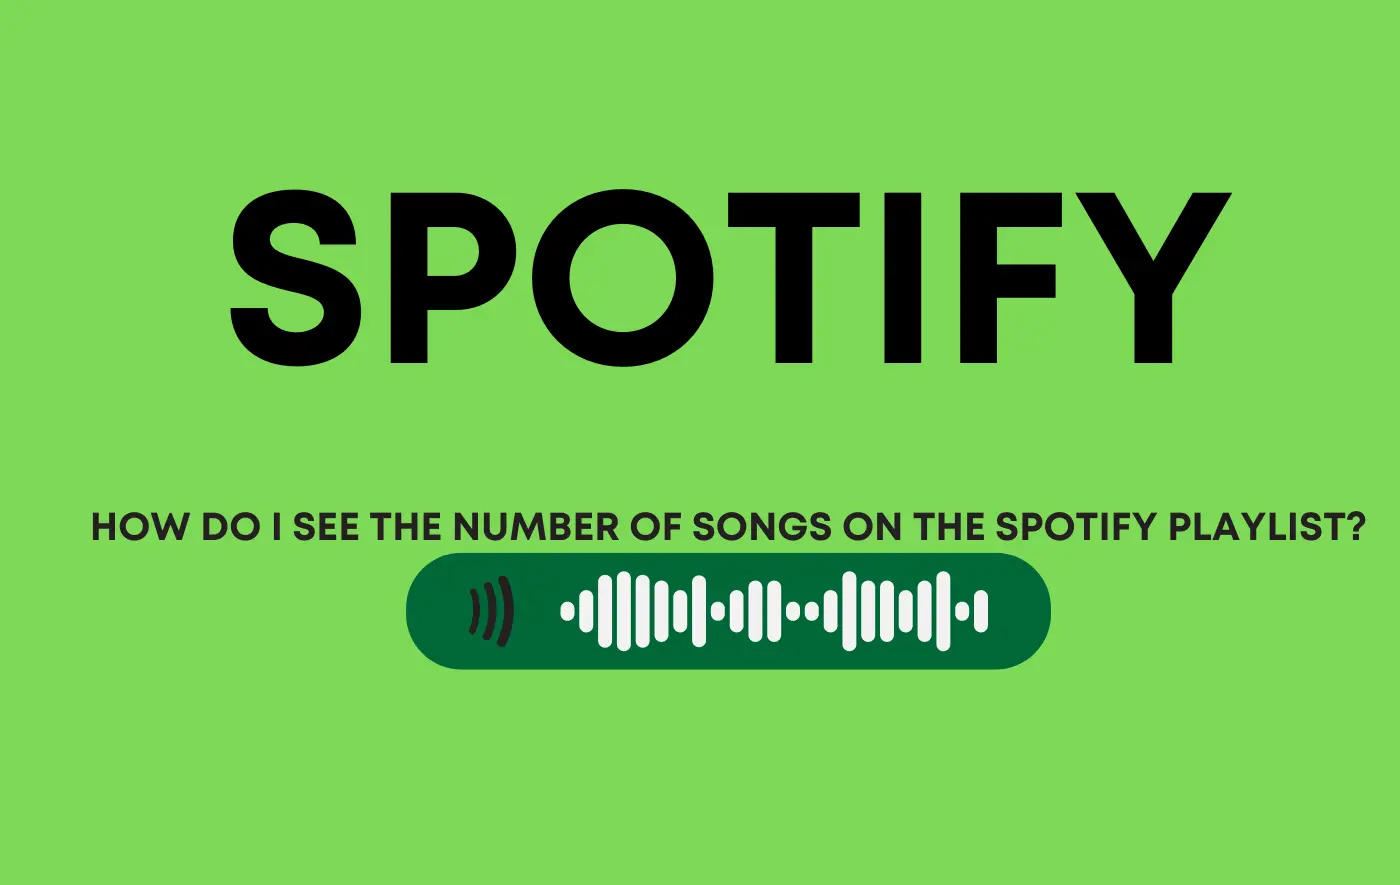 See the number of songs on the Spotify playlist? How many songs in my Spotify library?